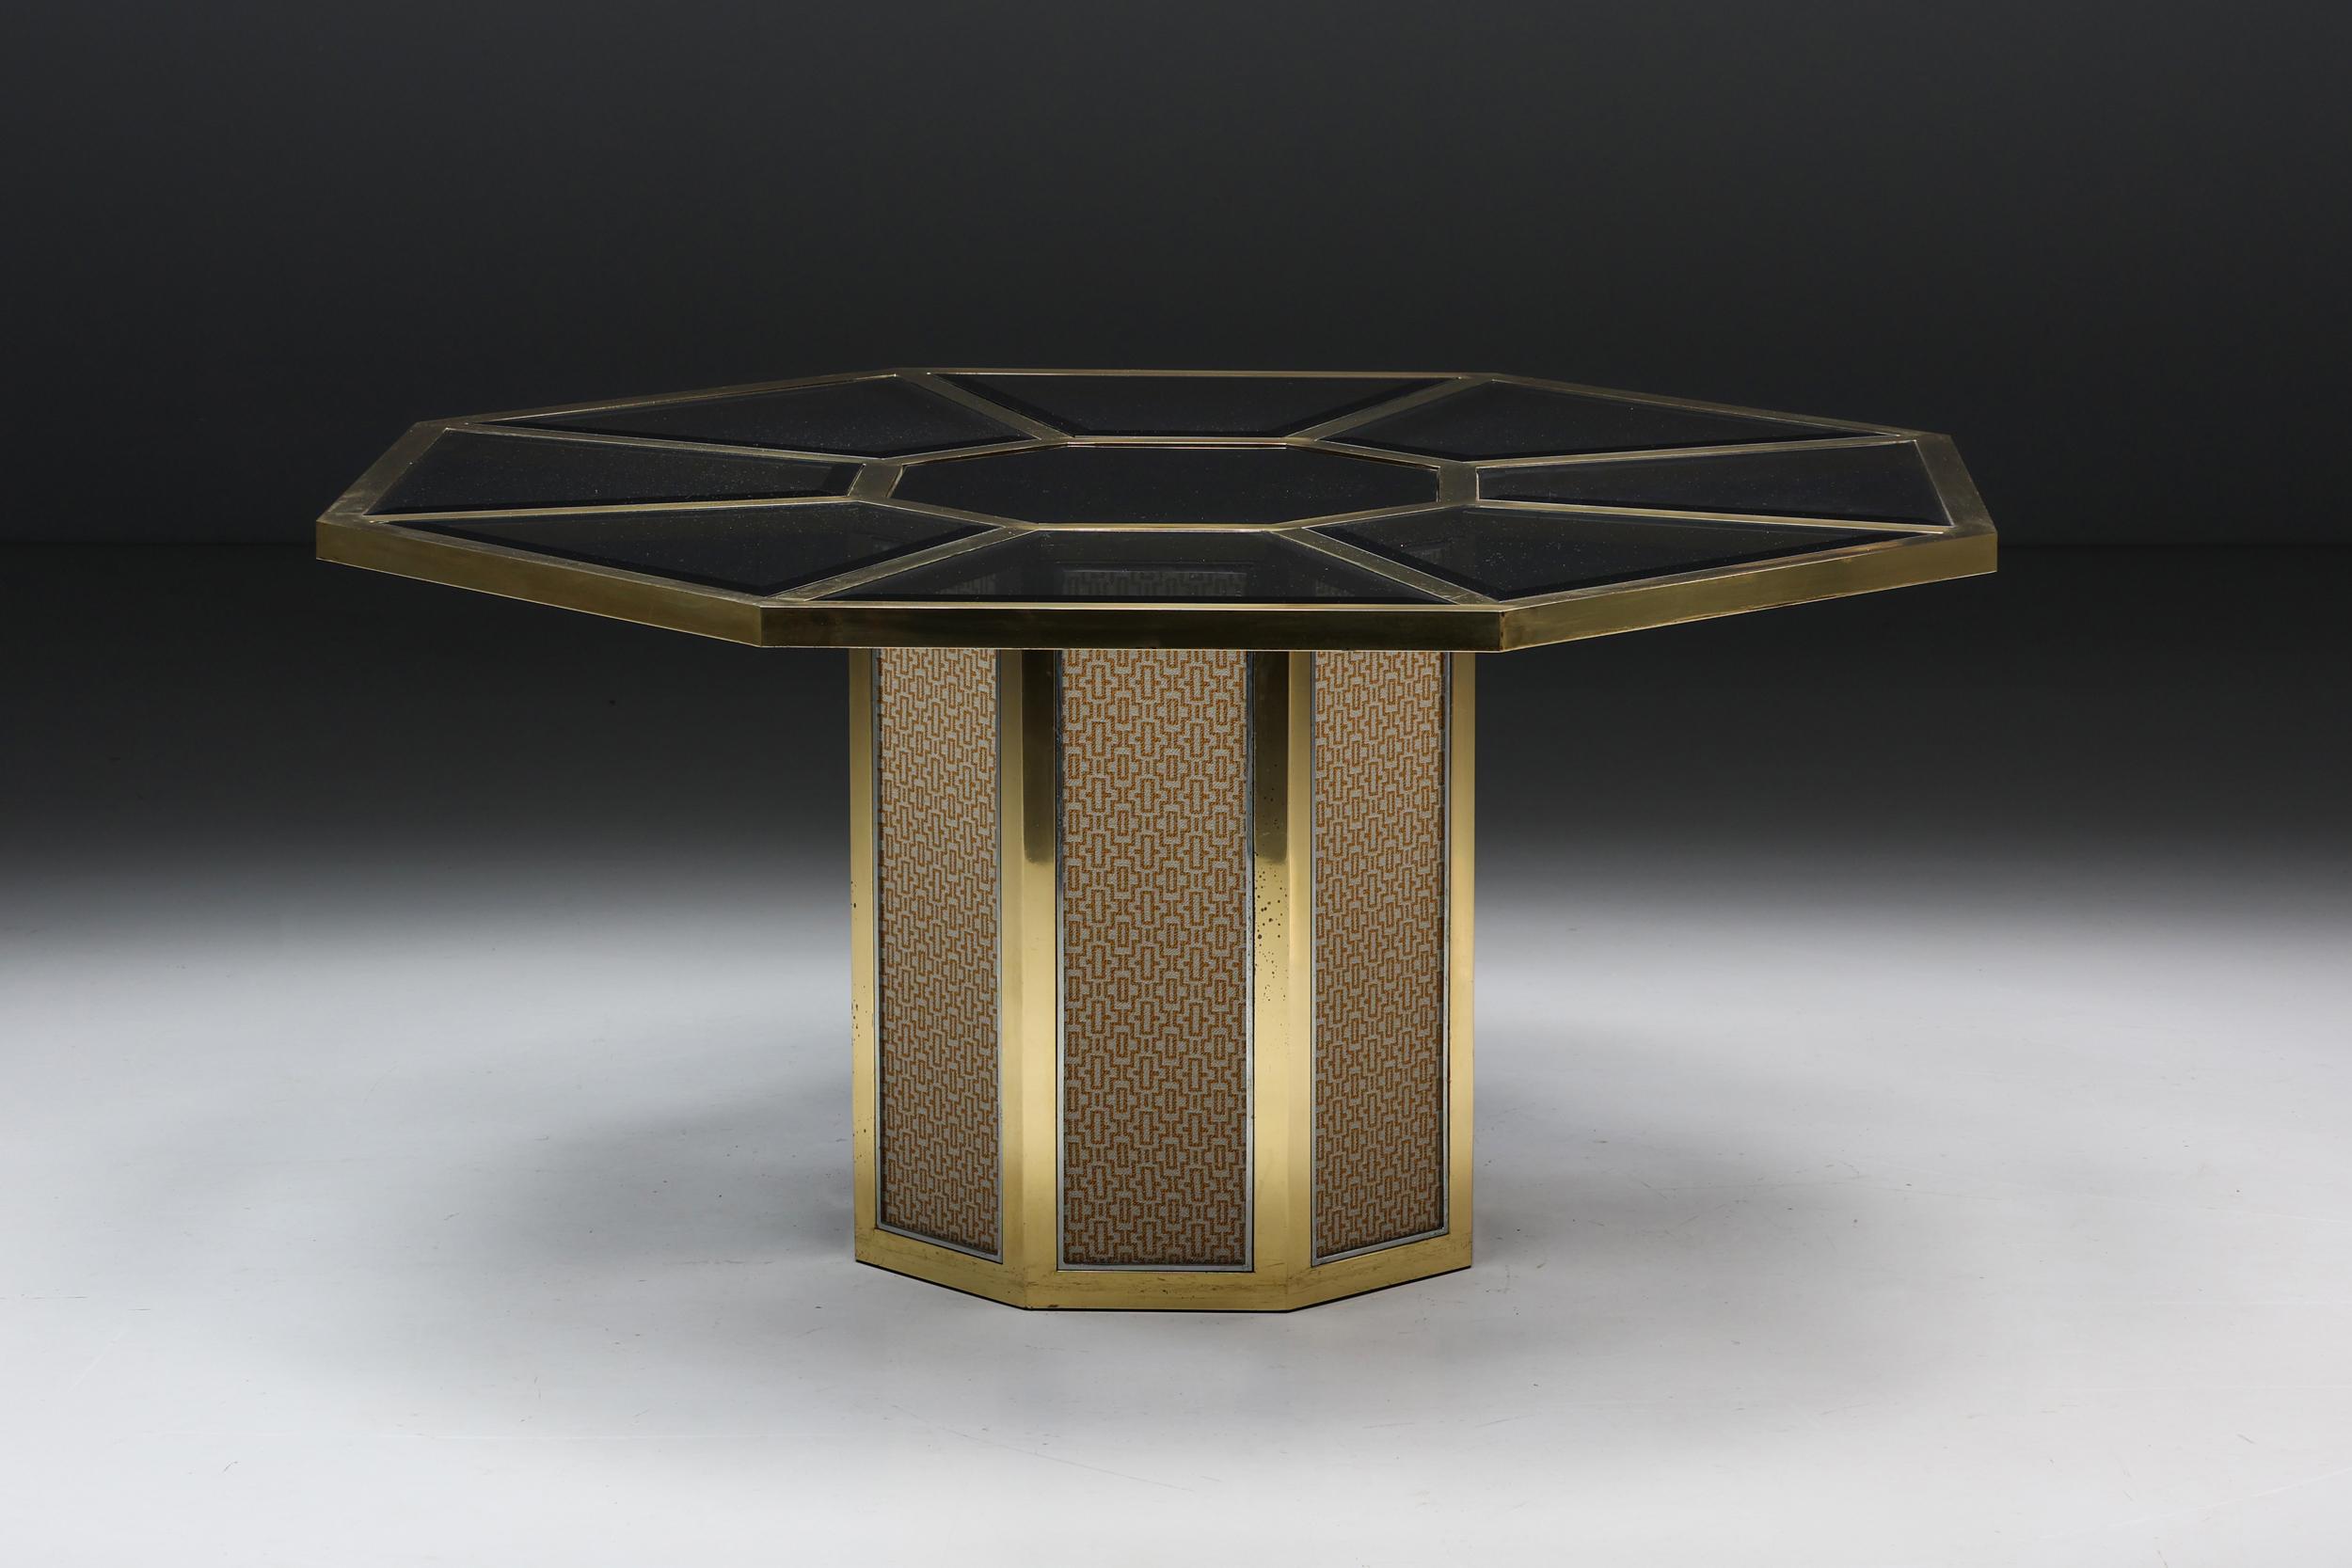 Octagonal dining table by Romeo Rega, a true gem from 1970s Italy. Crafted with precision in vintage polished brass and chrome-plated accents, this table not only showcases Rega's iconic octagonal design but also features exquisite fabric on its